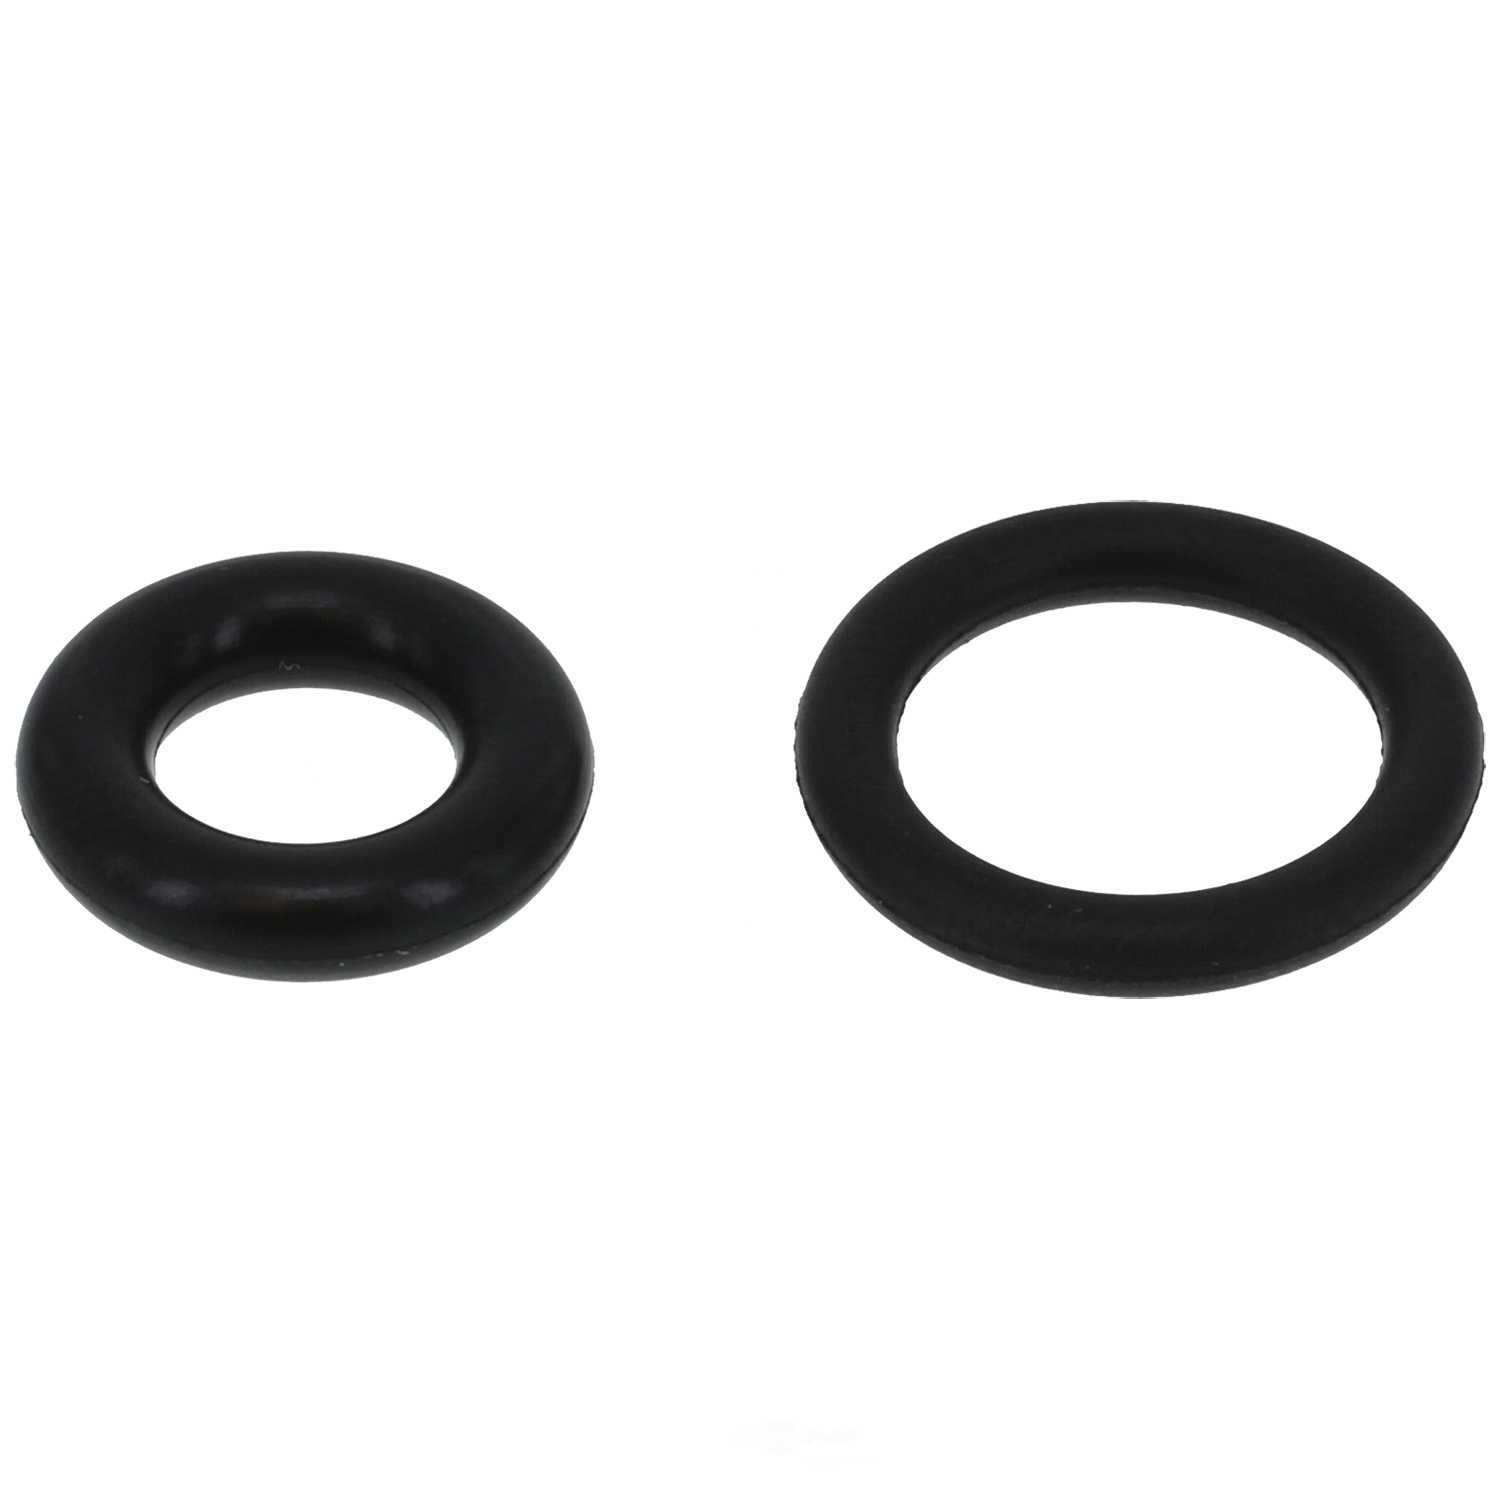 GB REMANUFACTURING INC. - Fuel Injector Seal Kit - GBR 8-019